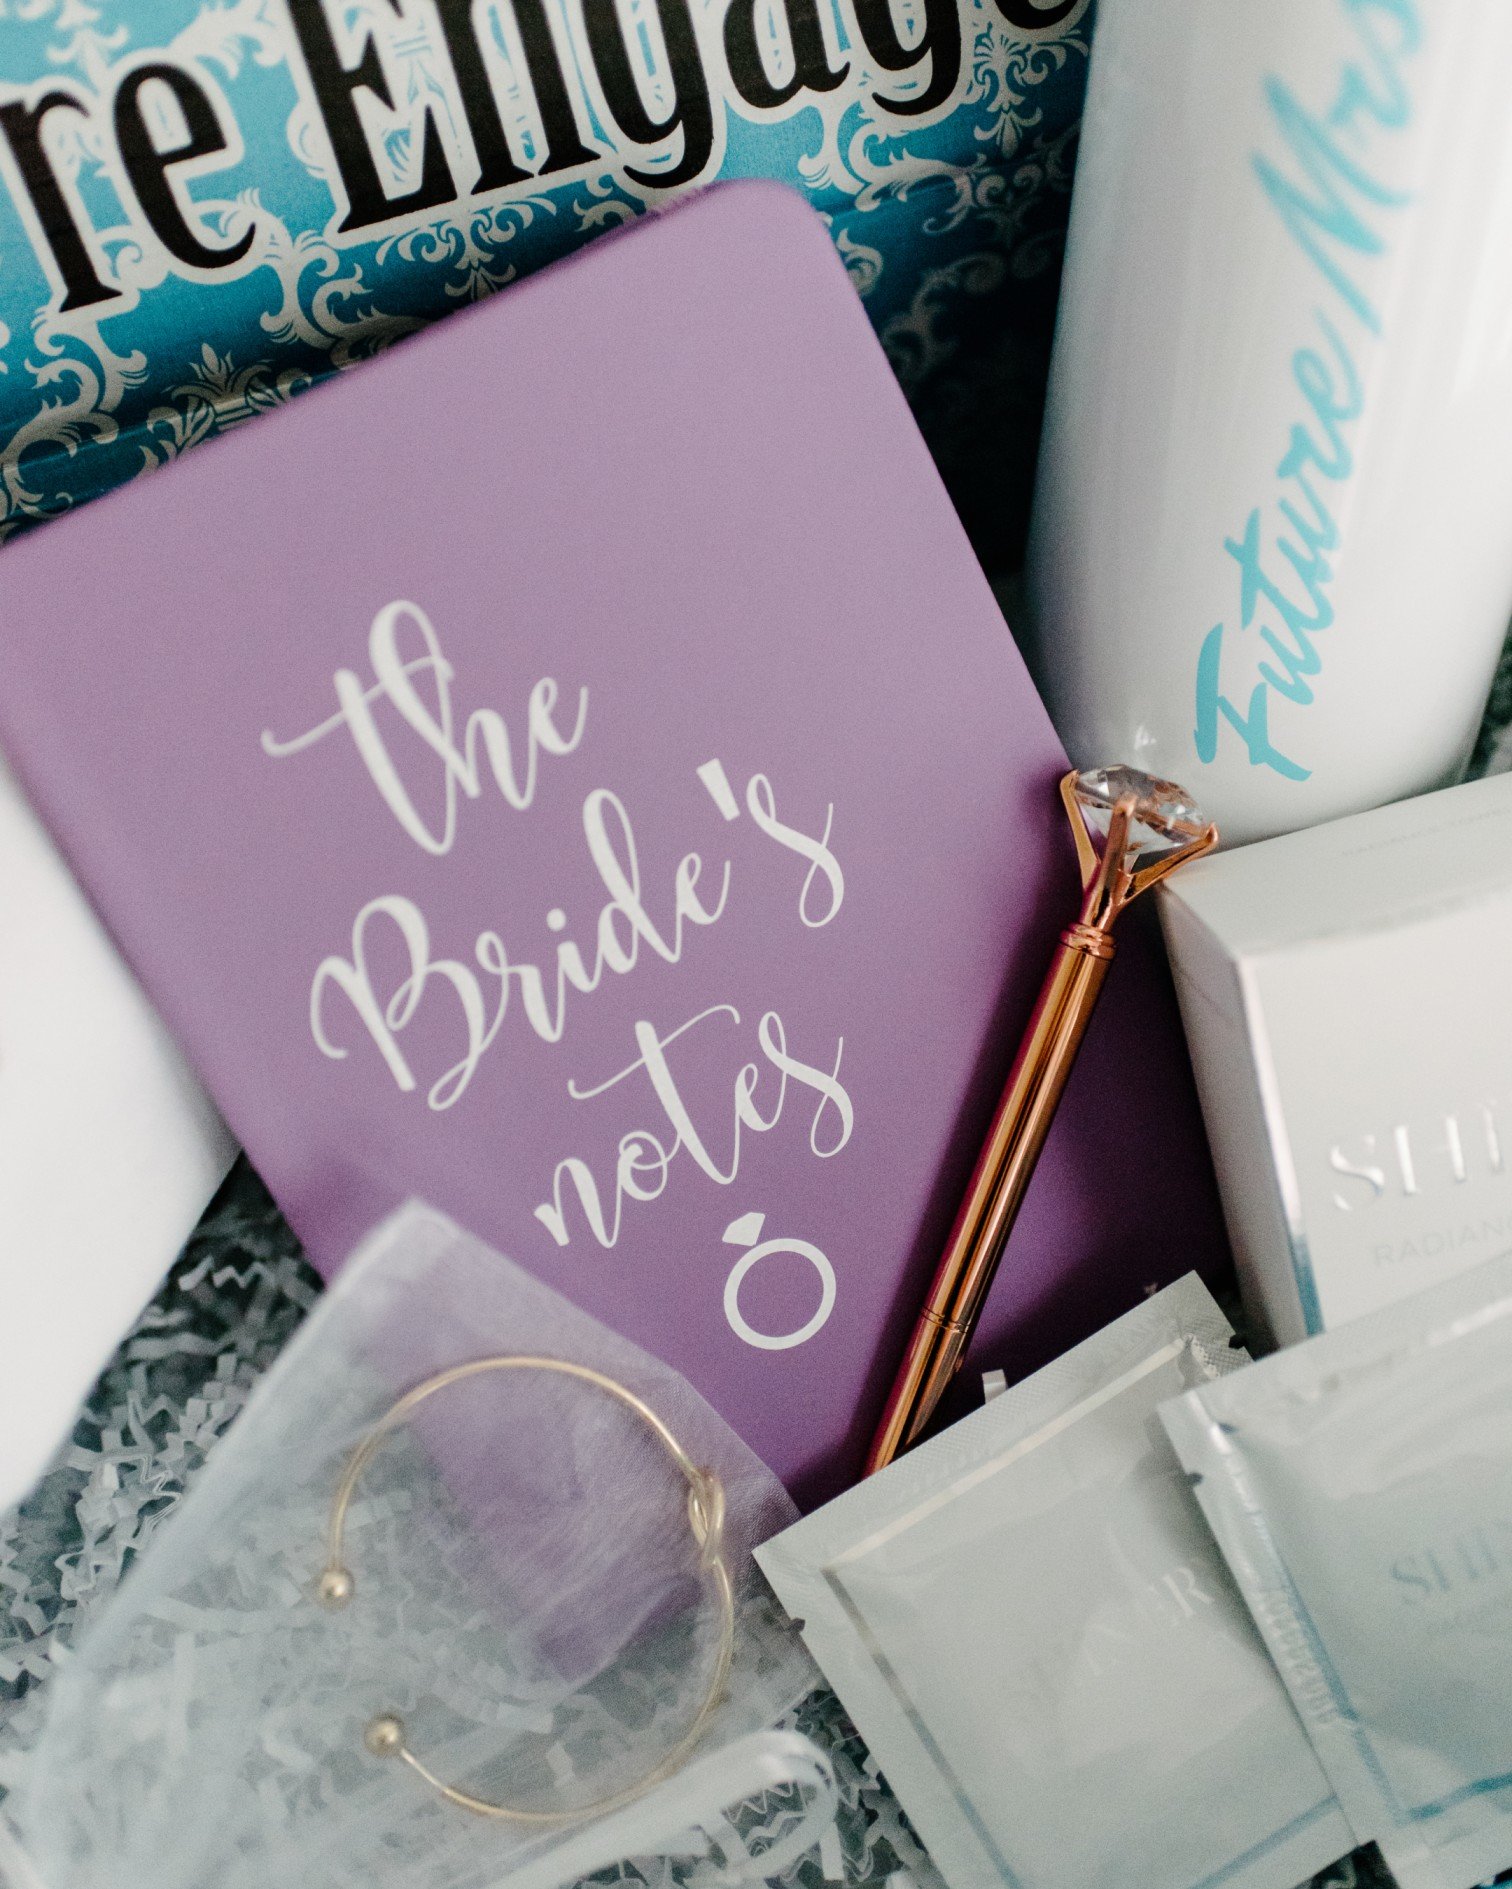 Bride Box in Best Boxes